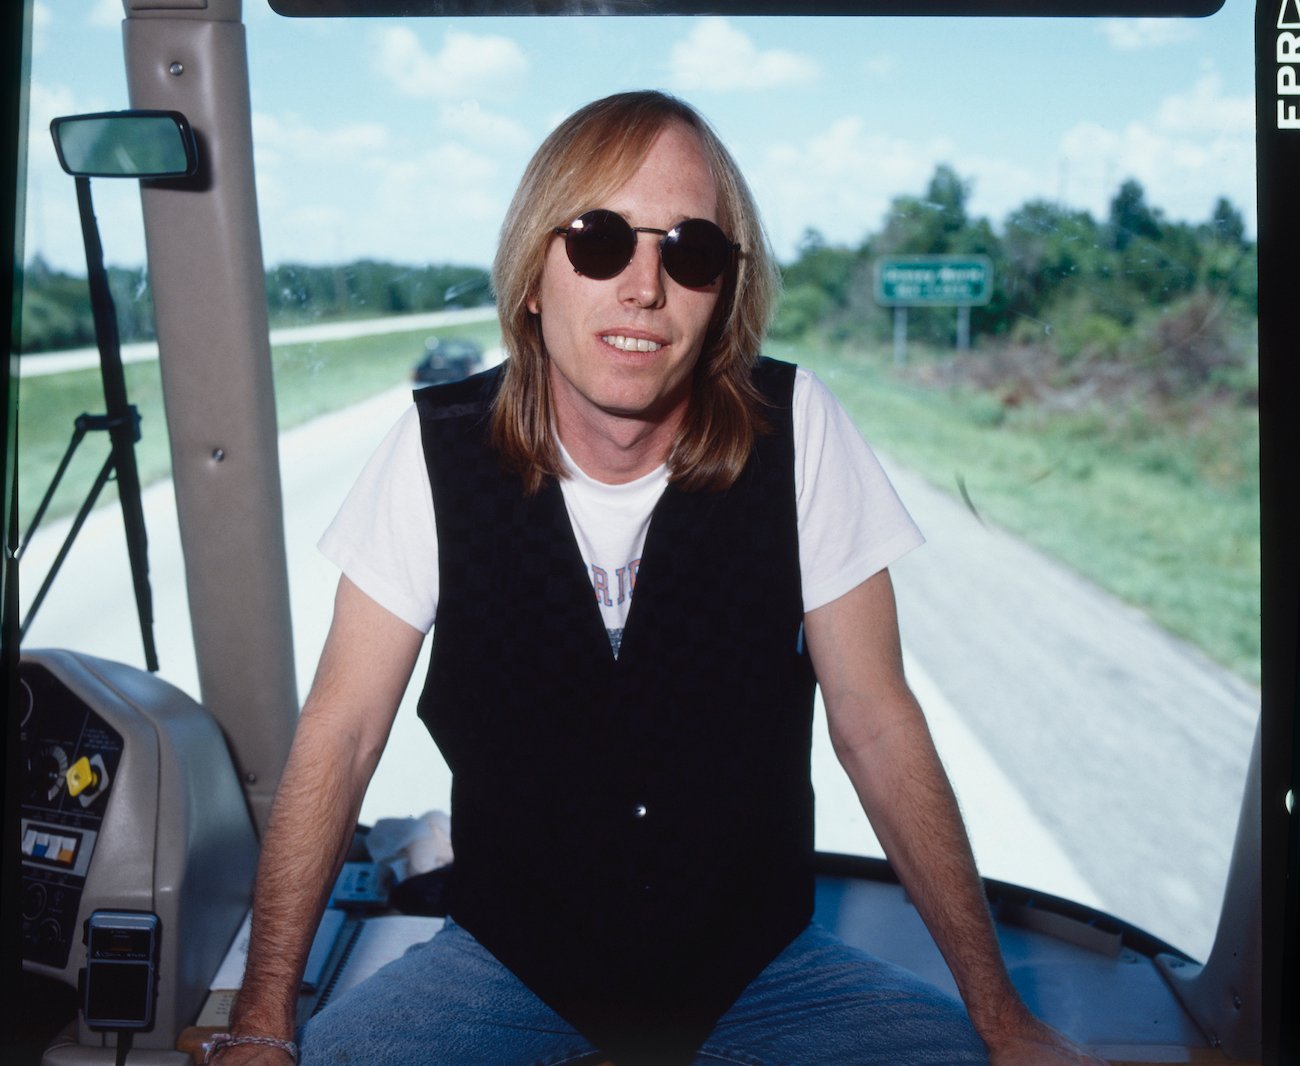 Tom Petty wearing sunglasses during his 1983 tour. 